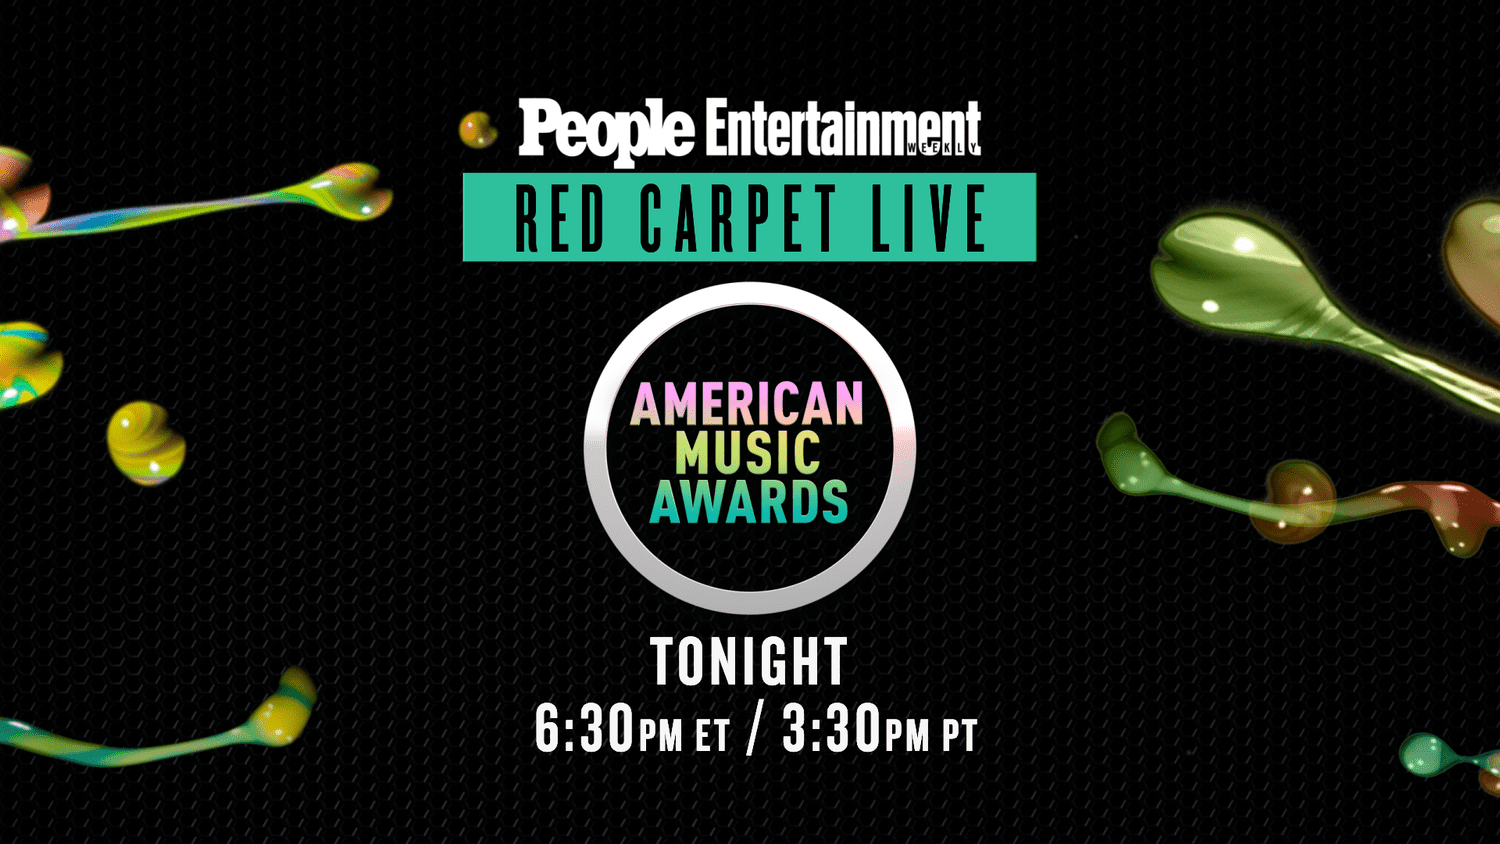 American Music Awards 2021 Red Carpet Live